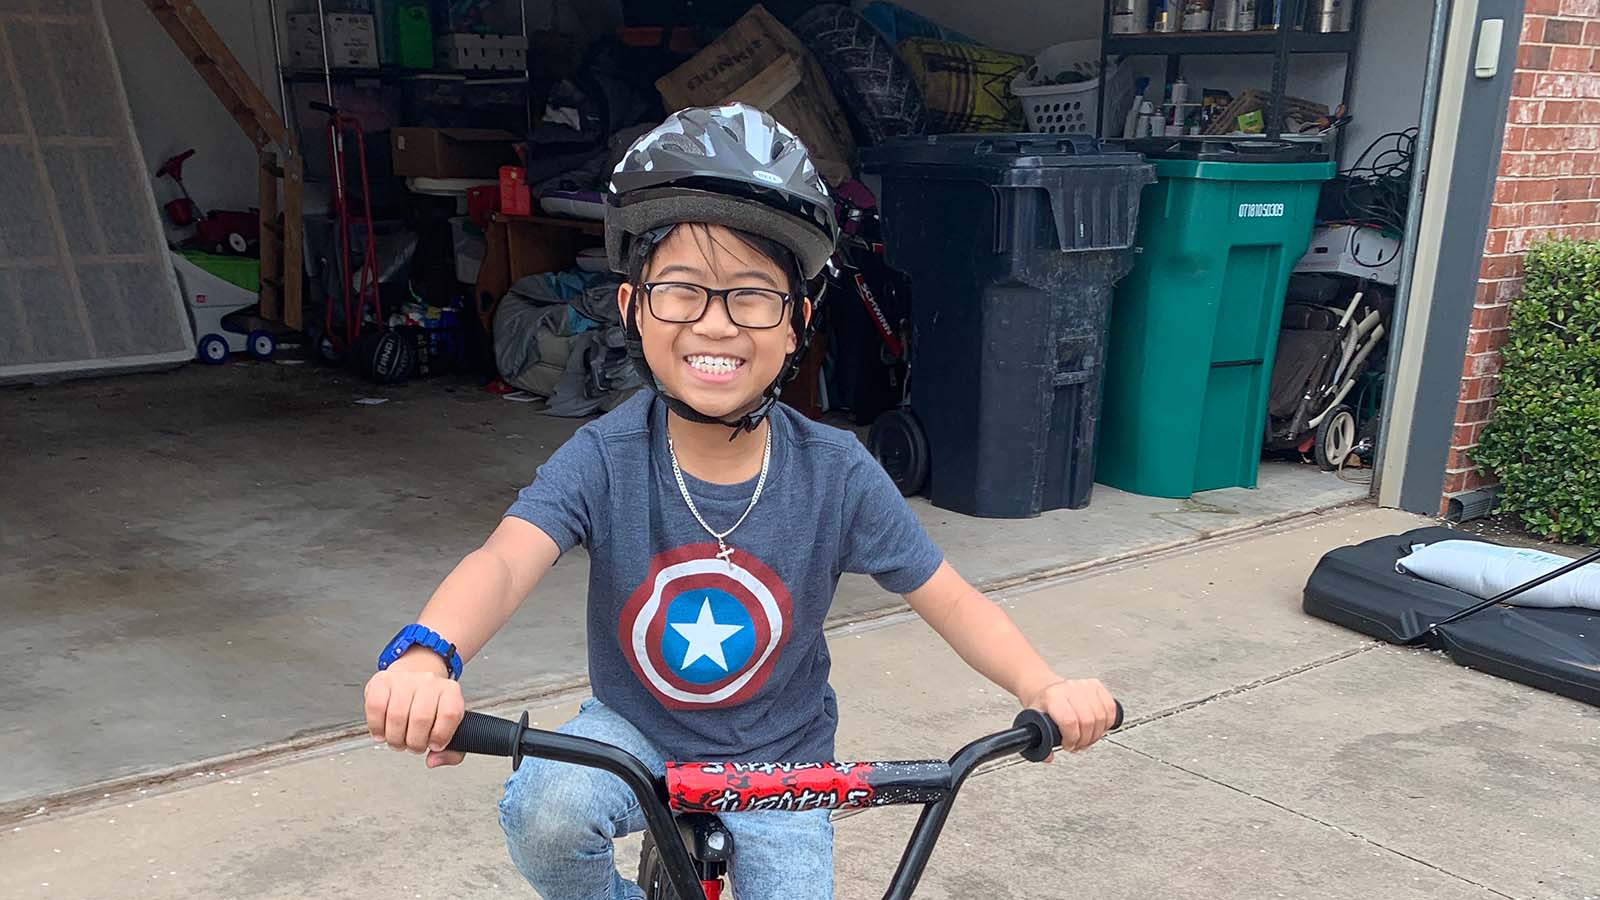 Boy smiles on his bike in family driveway